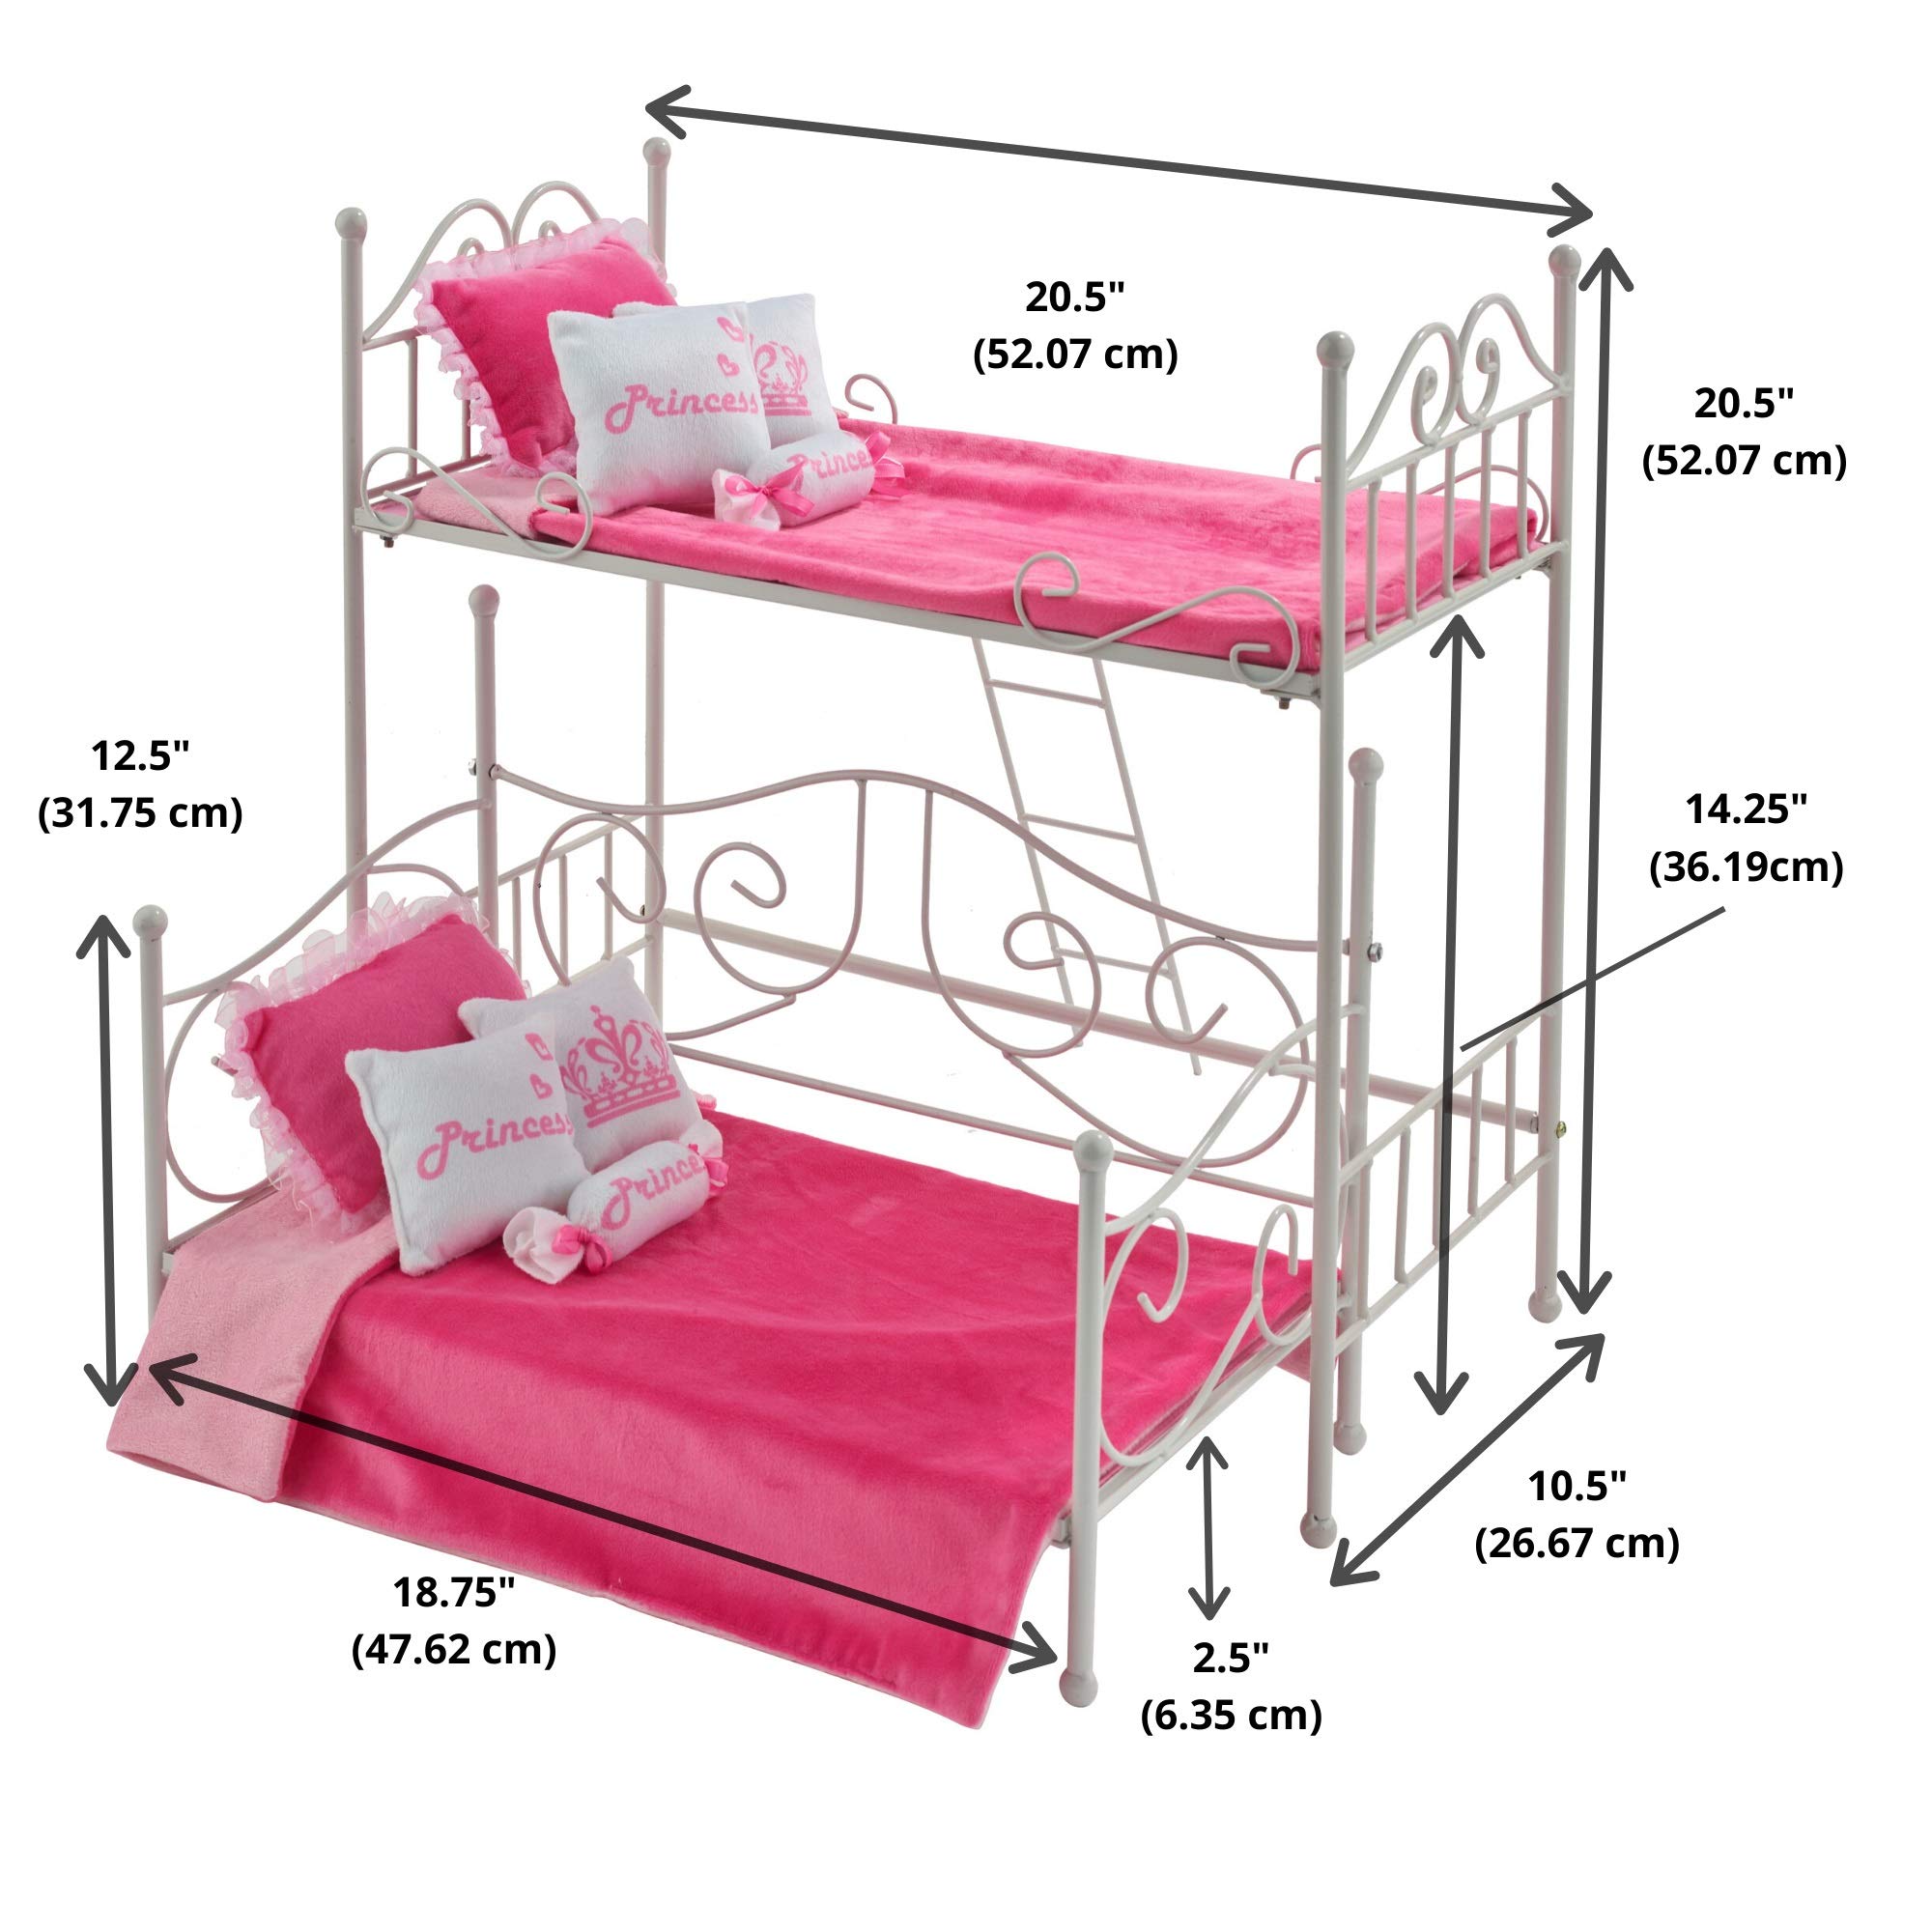 Badger Basket Toy Scrollwork Metal Doll Loft Bunk Bed with Daybed and Bedding for 18 inch Dolls - White/Pink